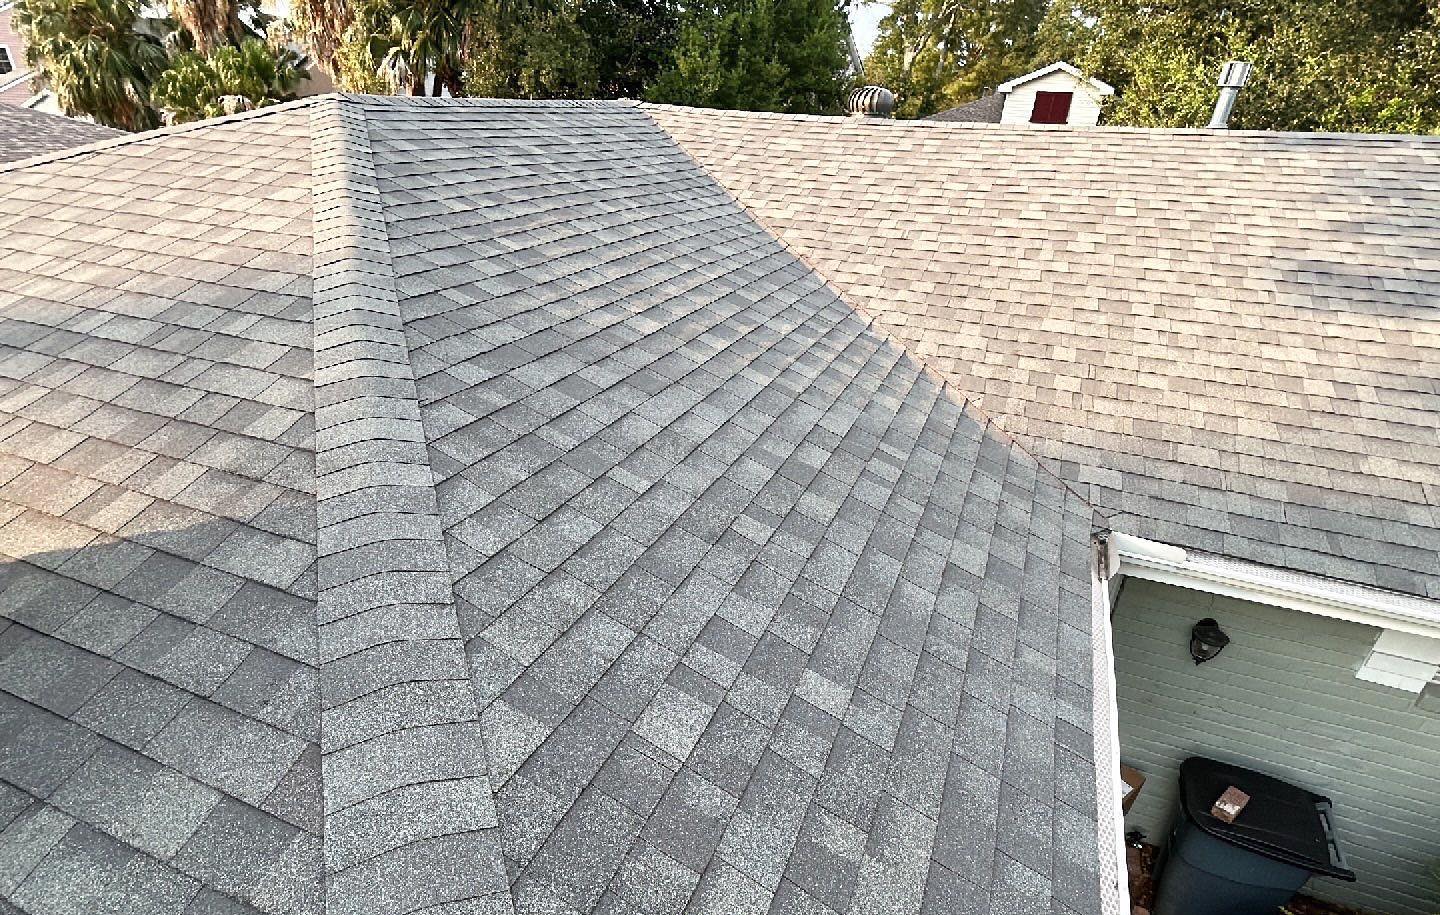 Roofing companies in Biloxi can install a shingle roof.